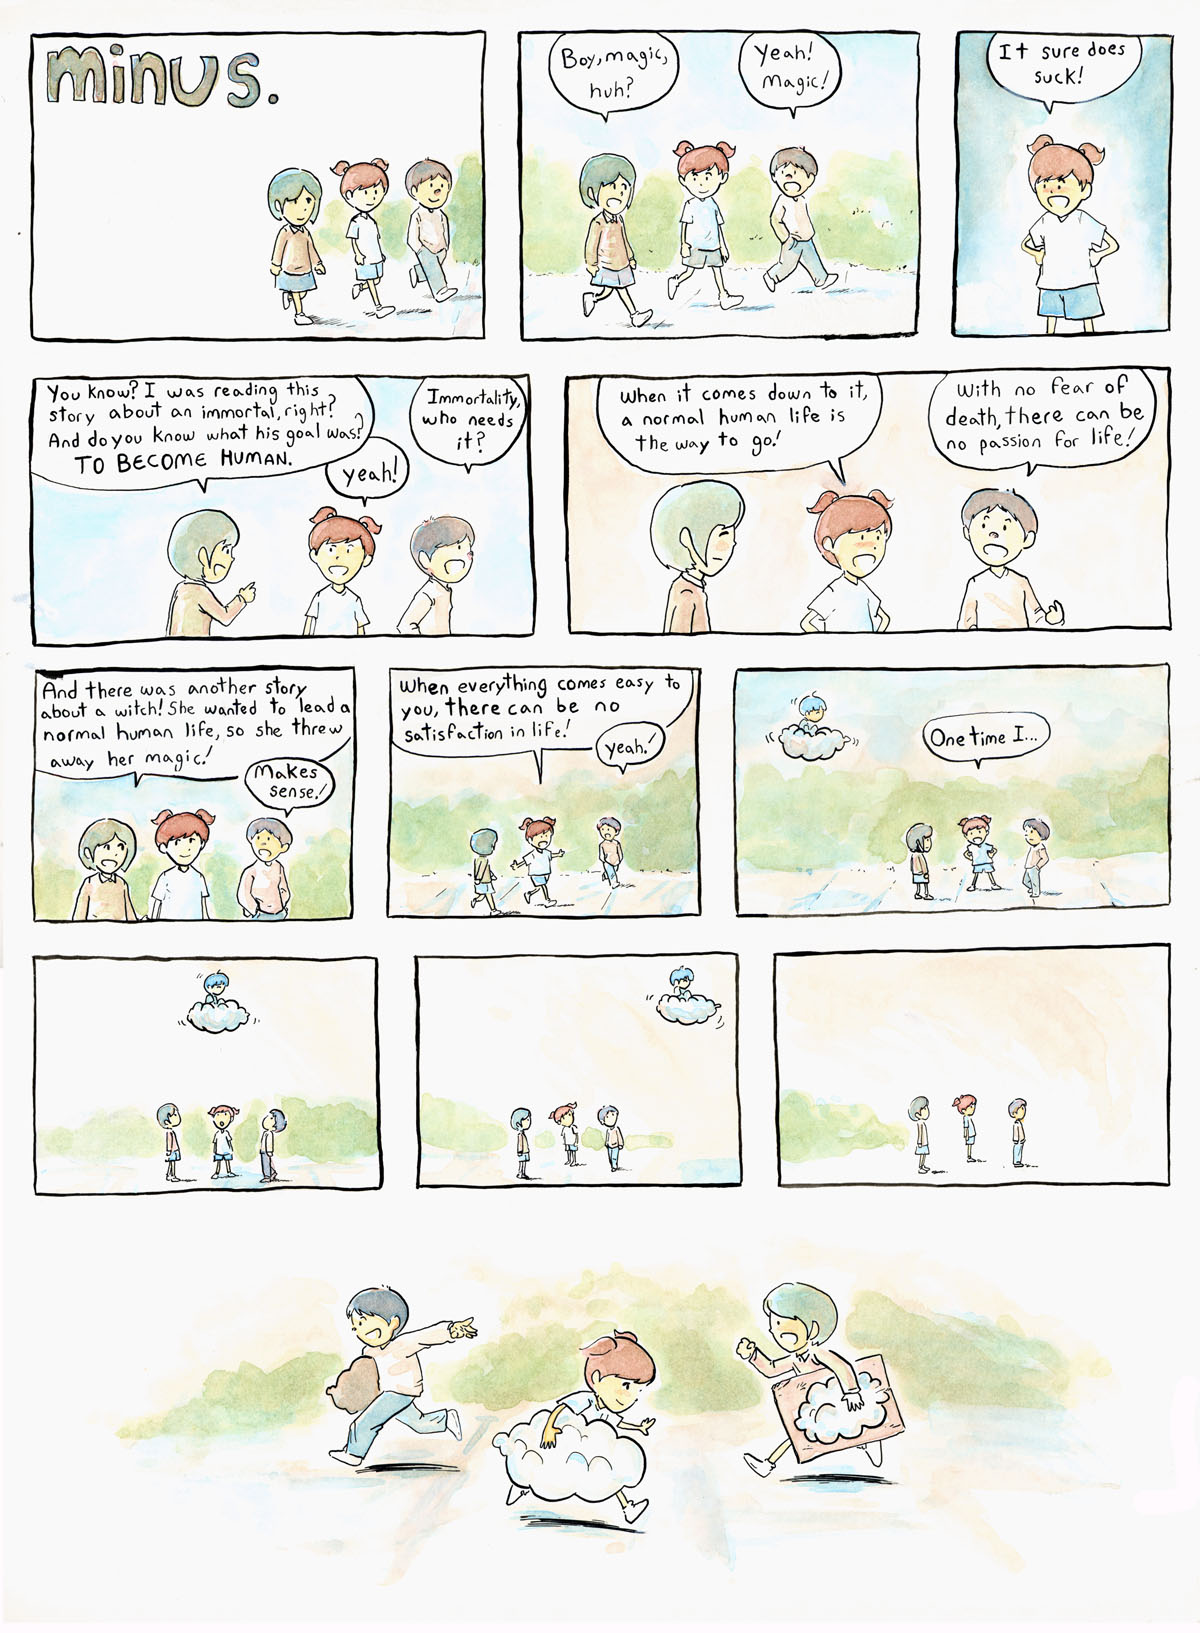 Comic strip. Transcription. Title: "minus." Three children walk on a sidewalk. Girl 1: "Boy, magic, huh?" Boy: "Yeah! Magic!" Girl 2: "It sure does suck!" Girl 1: "You know? I was reading this story about an immortal, right? And do you know what his goal was? TO BECOME HUMAN." Girl 2: "yeah!" Boy: "Immortality, who needs it?" Girl 2: "When it comes down to it, a normal human life is the way to go!" Boy: "With no fear of death, there can be no passion for life!" Girl 1: "And there was another story about a witch! She wanted to lead a normal human life, so she threw away her magic!" Boy: "Makes sense!" Girl 2: "When everything comes easy to you, there can be no satisfaction in life!" Boy: "yeah!" In the background, a cloud passes nearby with minus riding on top of it. Girl 2: "One time I..." The children look up to see minus passing by. minus leaves the frame. The three children run around in a circle, smiling, holding large cardboard clouds beside them.